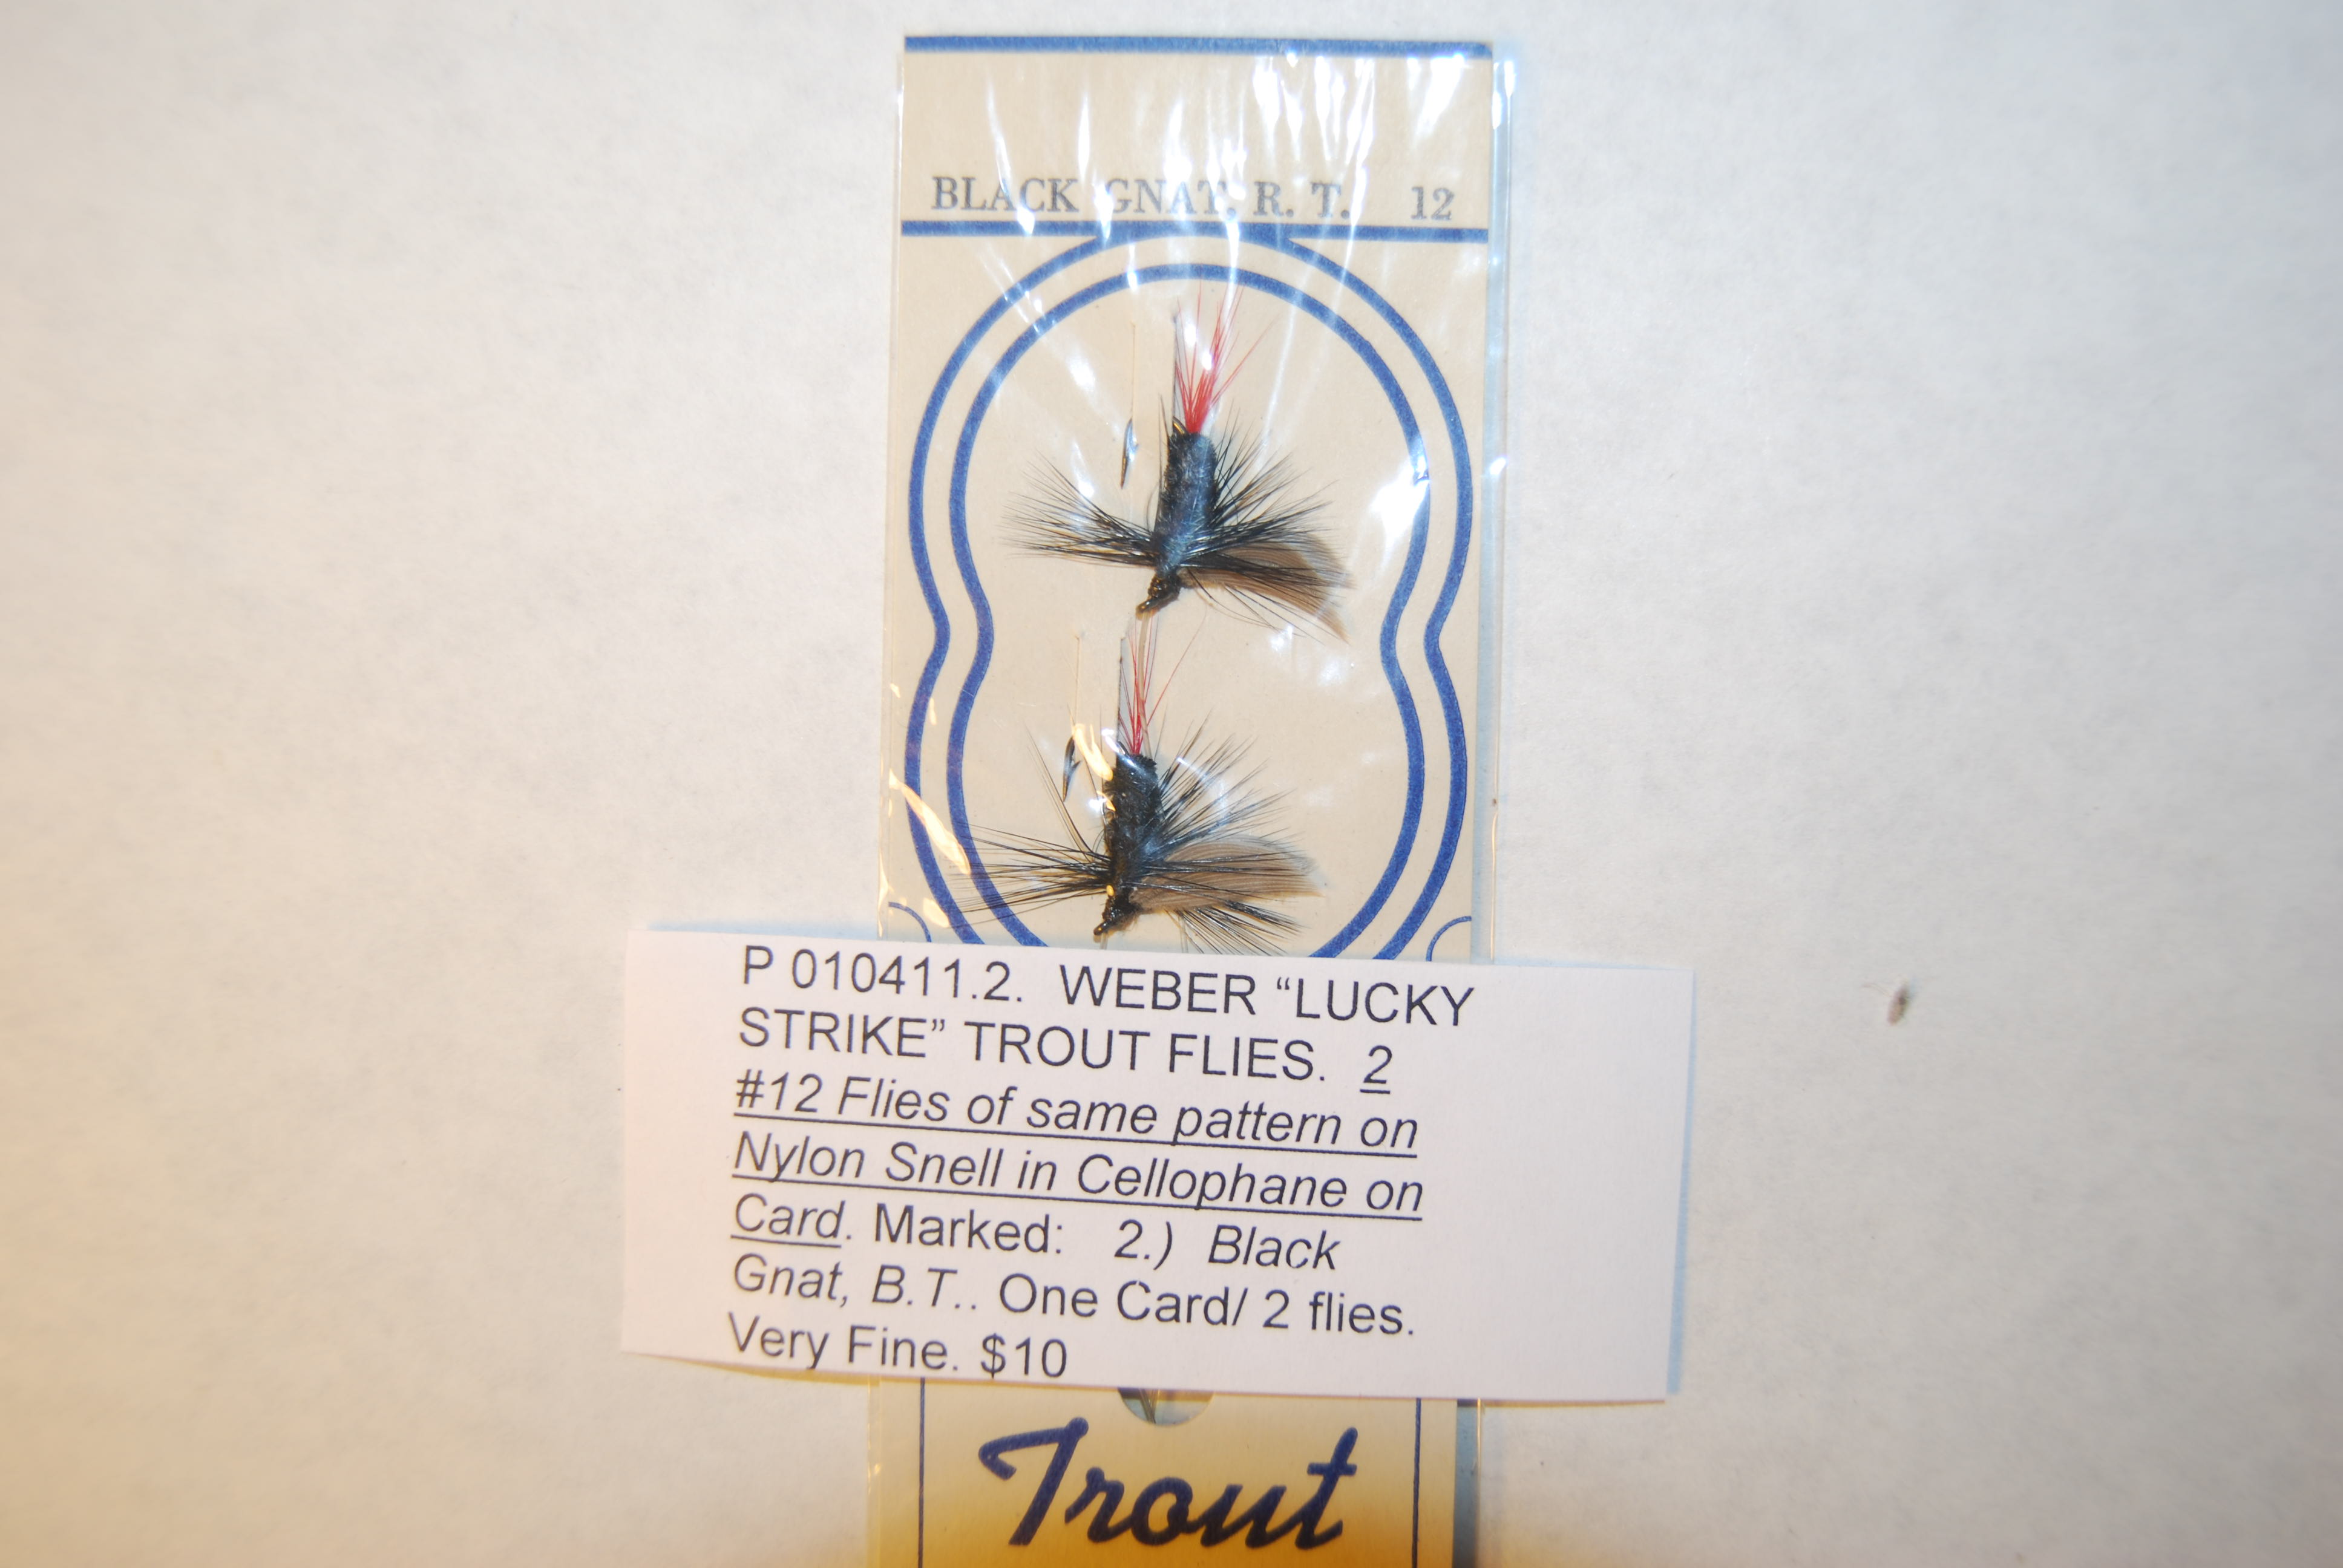 WEEZEL “BABY WEEZEL FEATHERED MINNOW' Fly Rod Lure 1/20 oz. Circa 1930's. 2  lures.